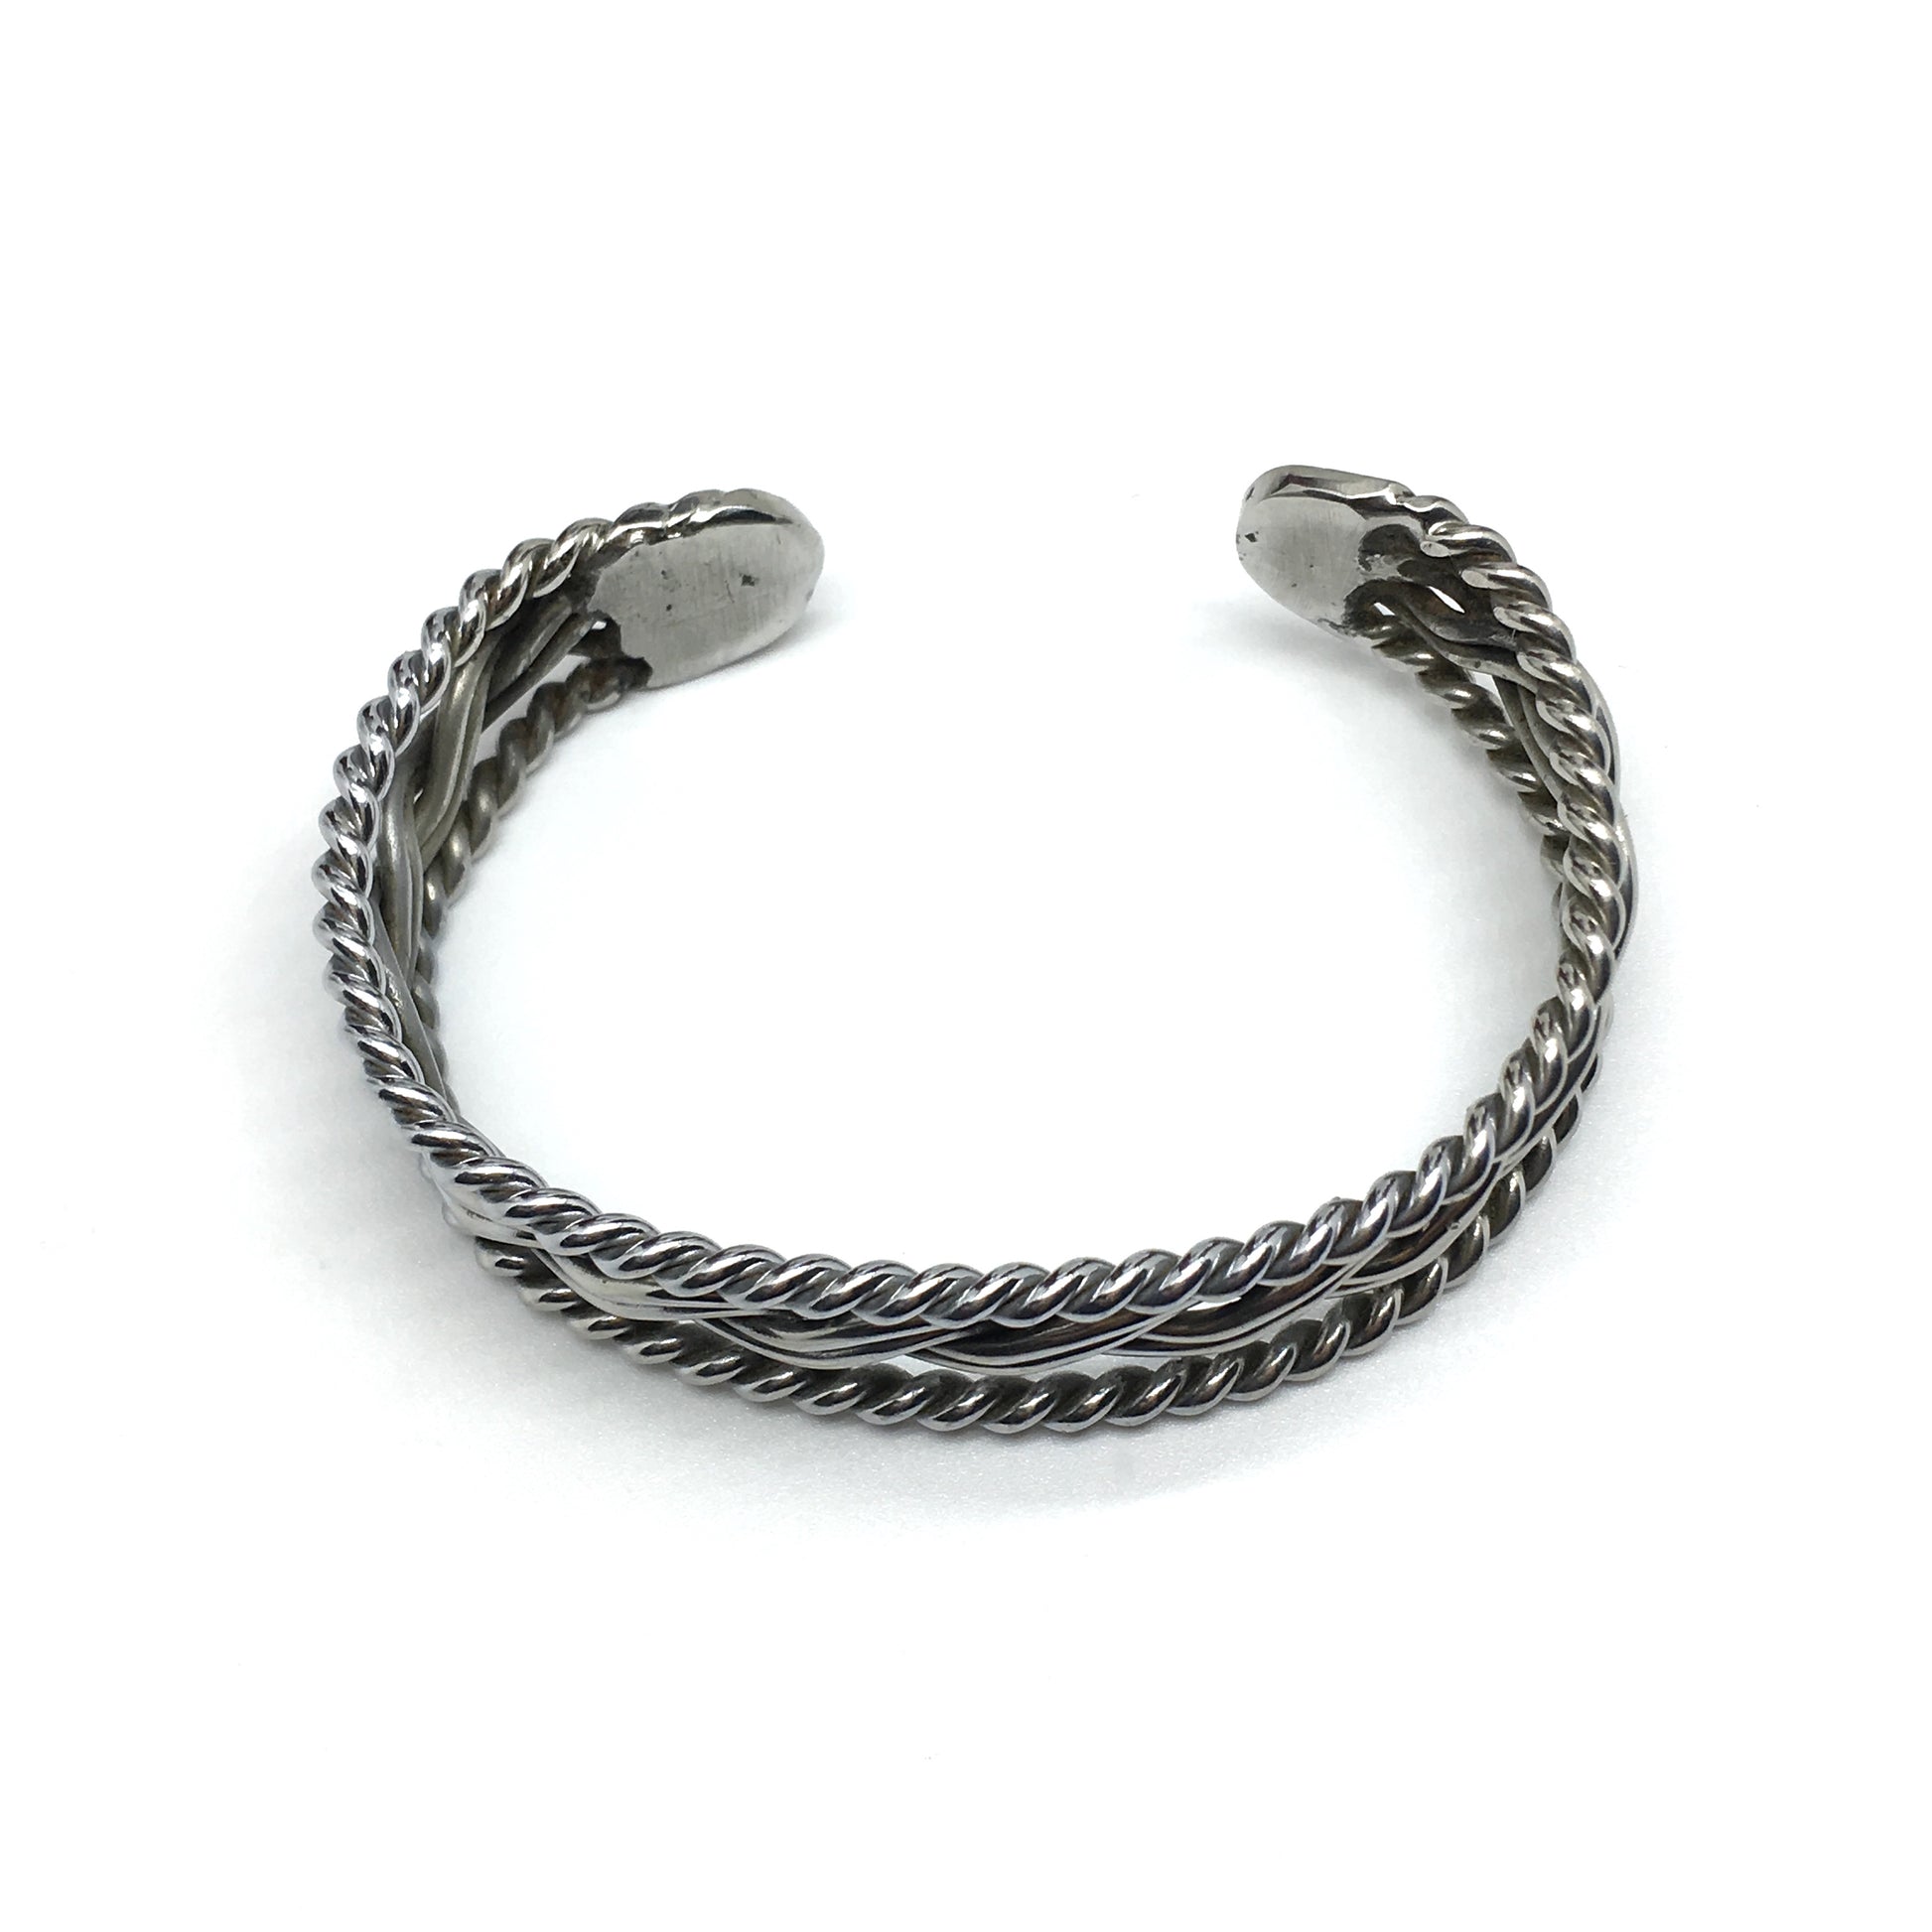 Jewelry used | Mens Womens Stainless Steel Braided Cuff Bracelet